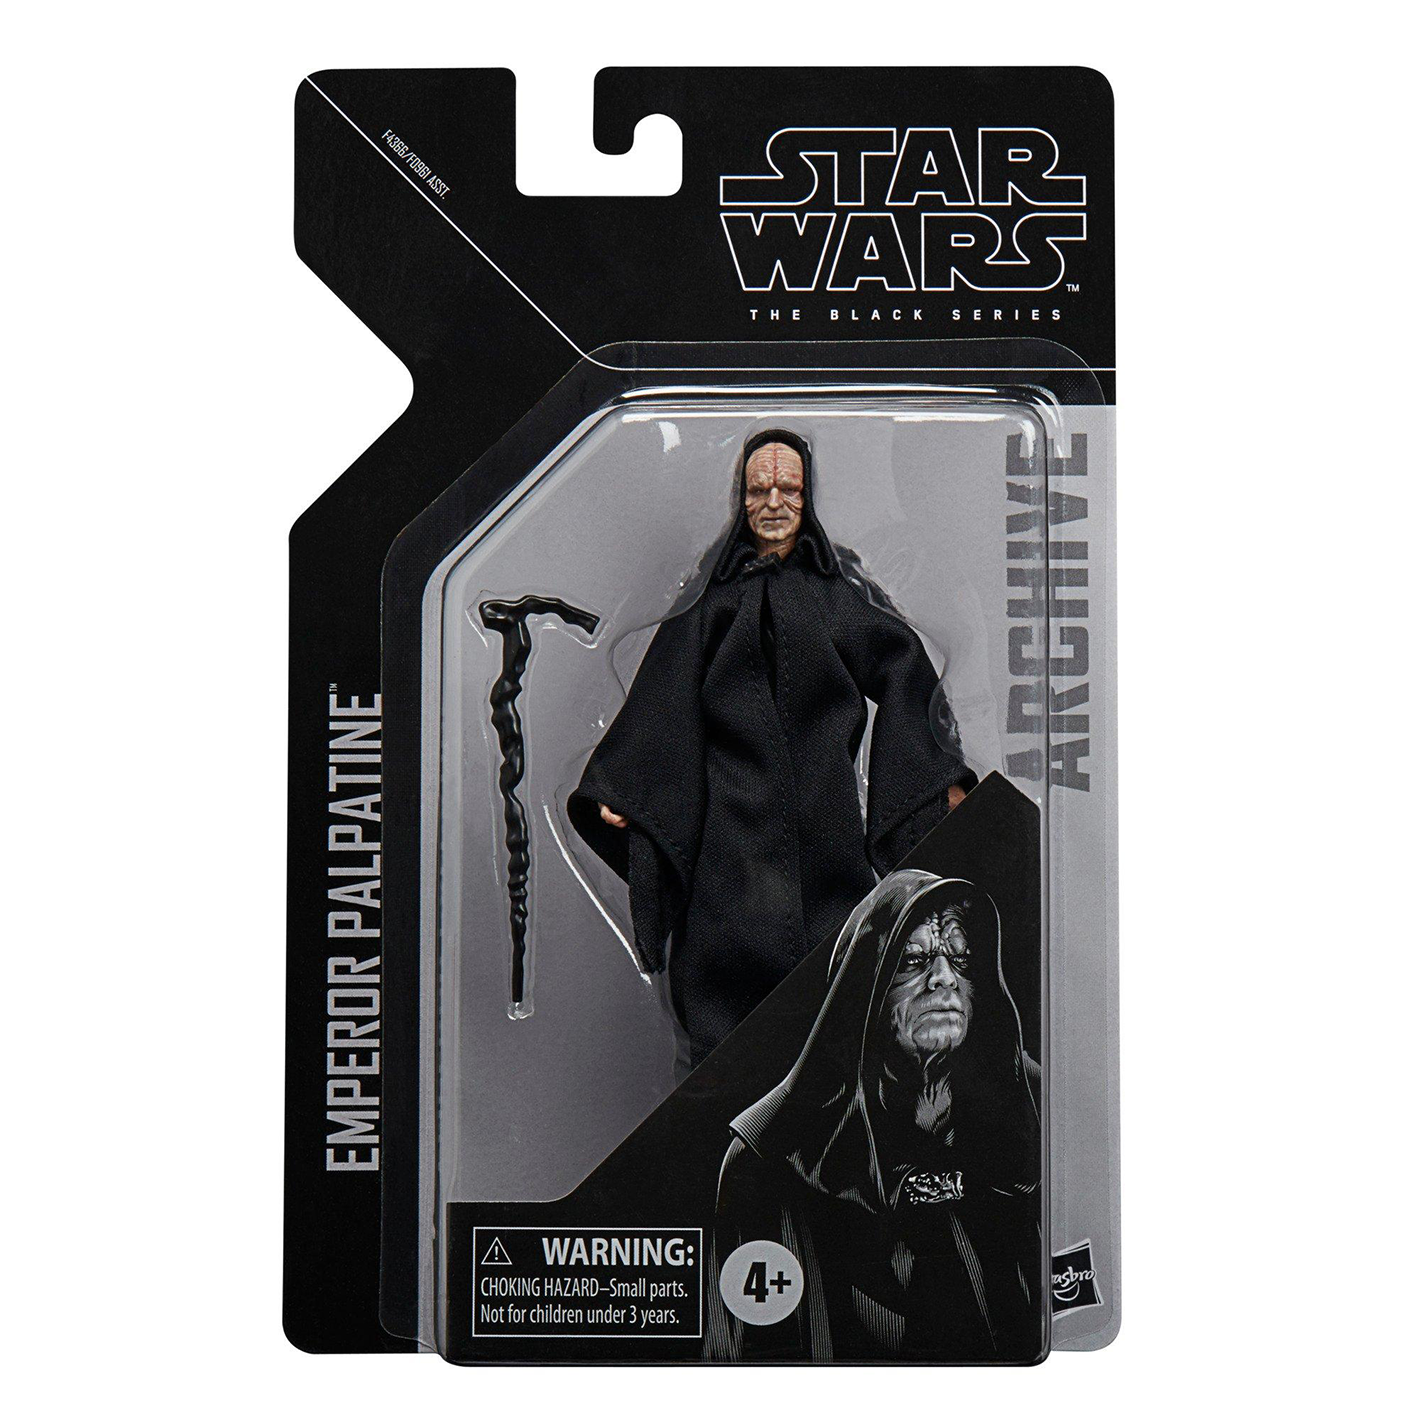 The Emperor Star Wars The Black Series